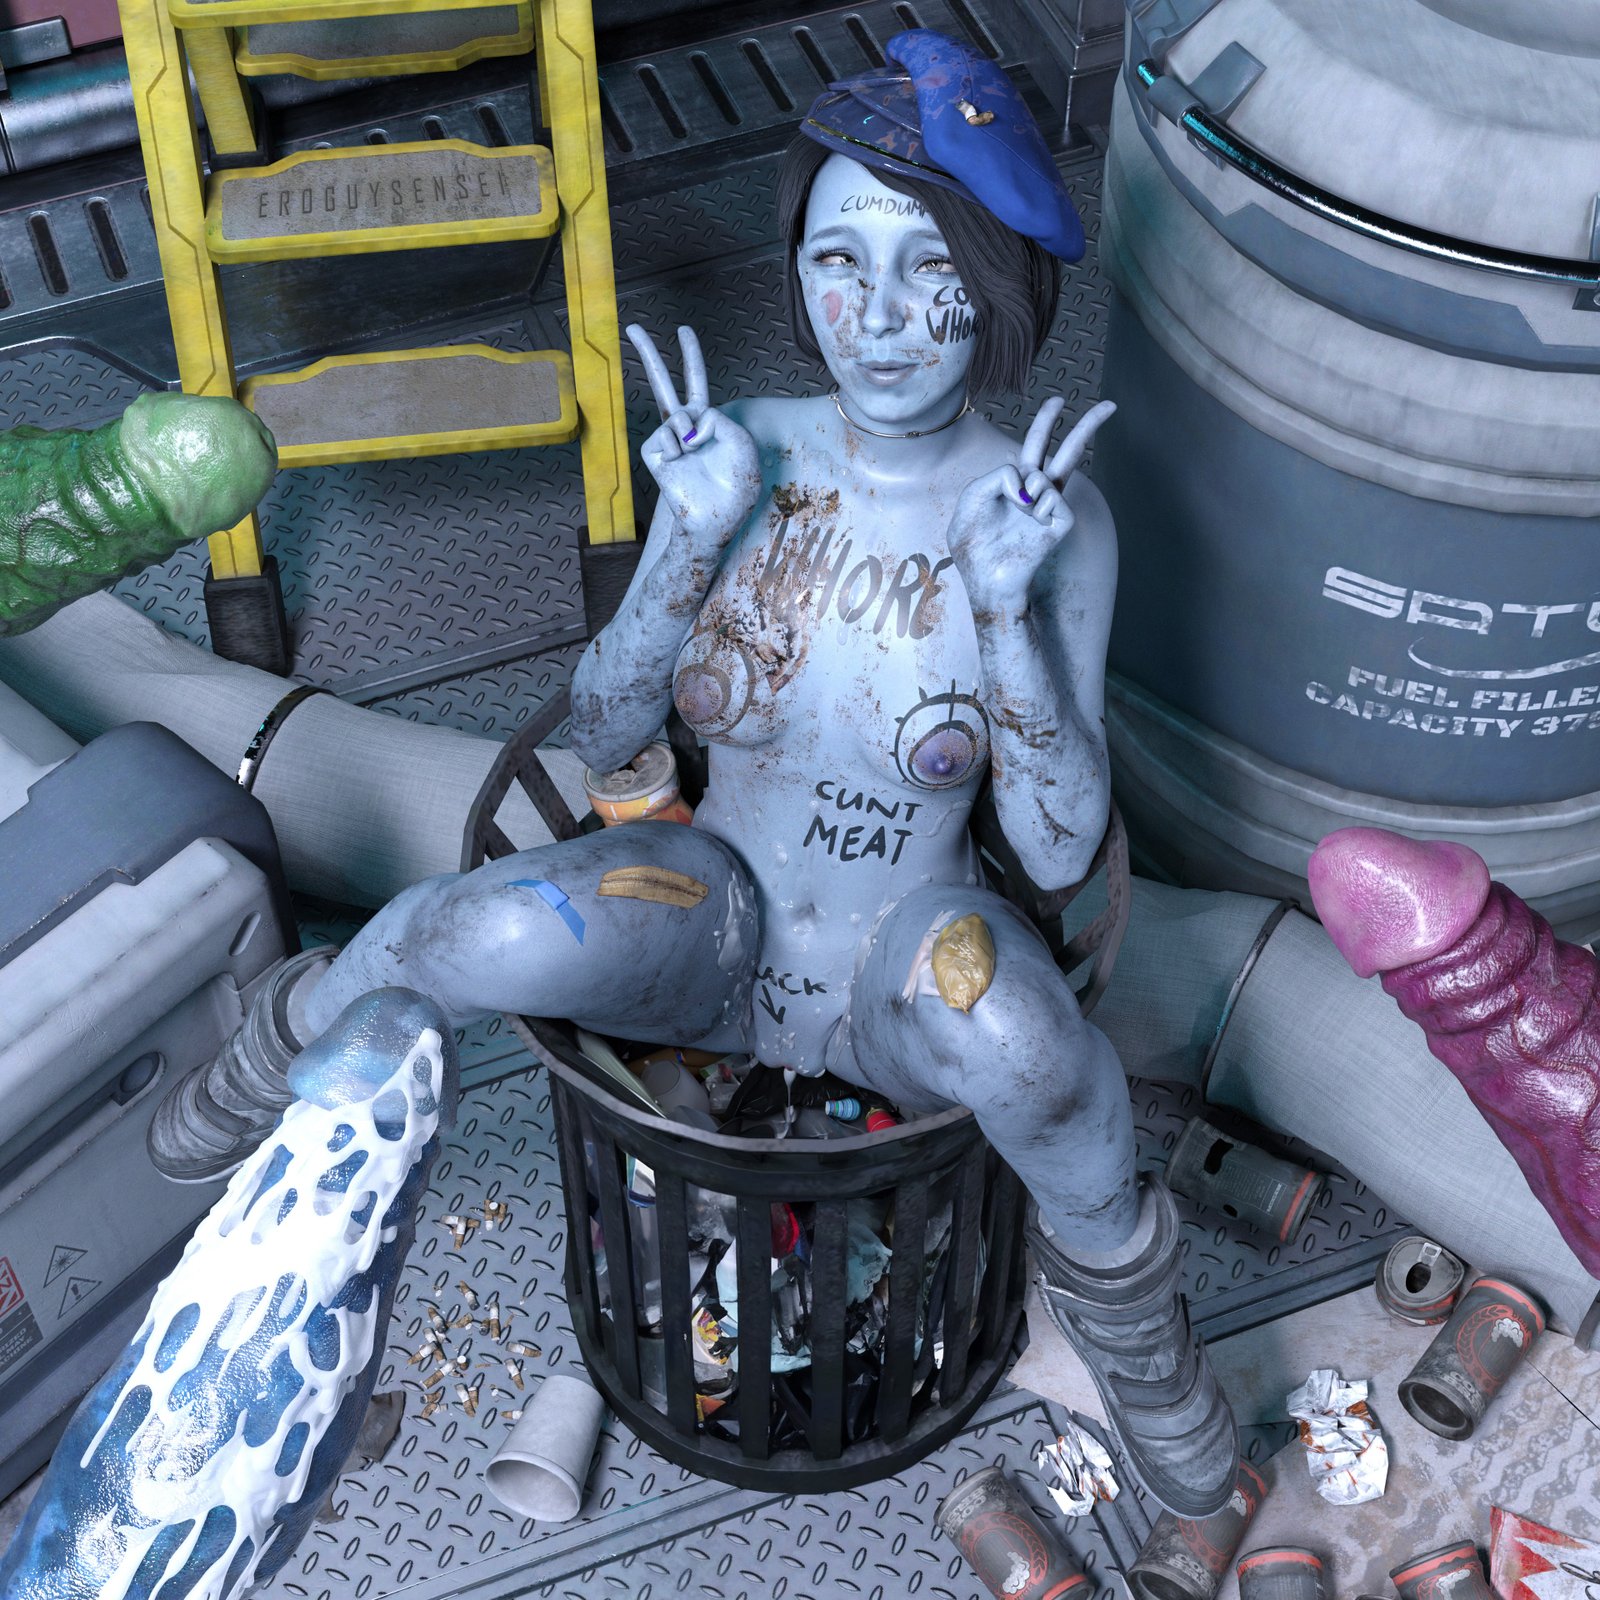 Nikki stuck in a trash can naked covered in garbage while surrounded by alien dicks